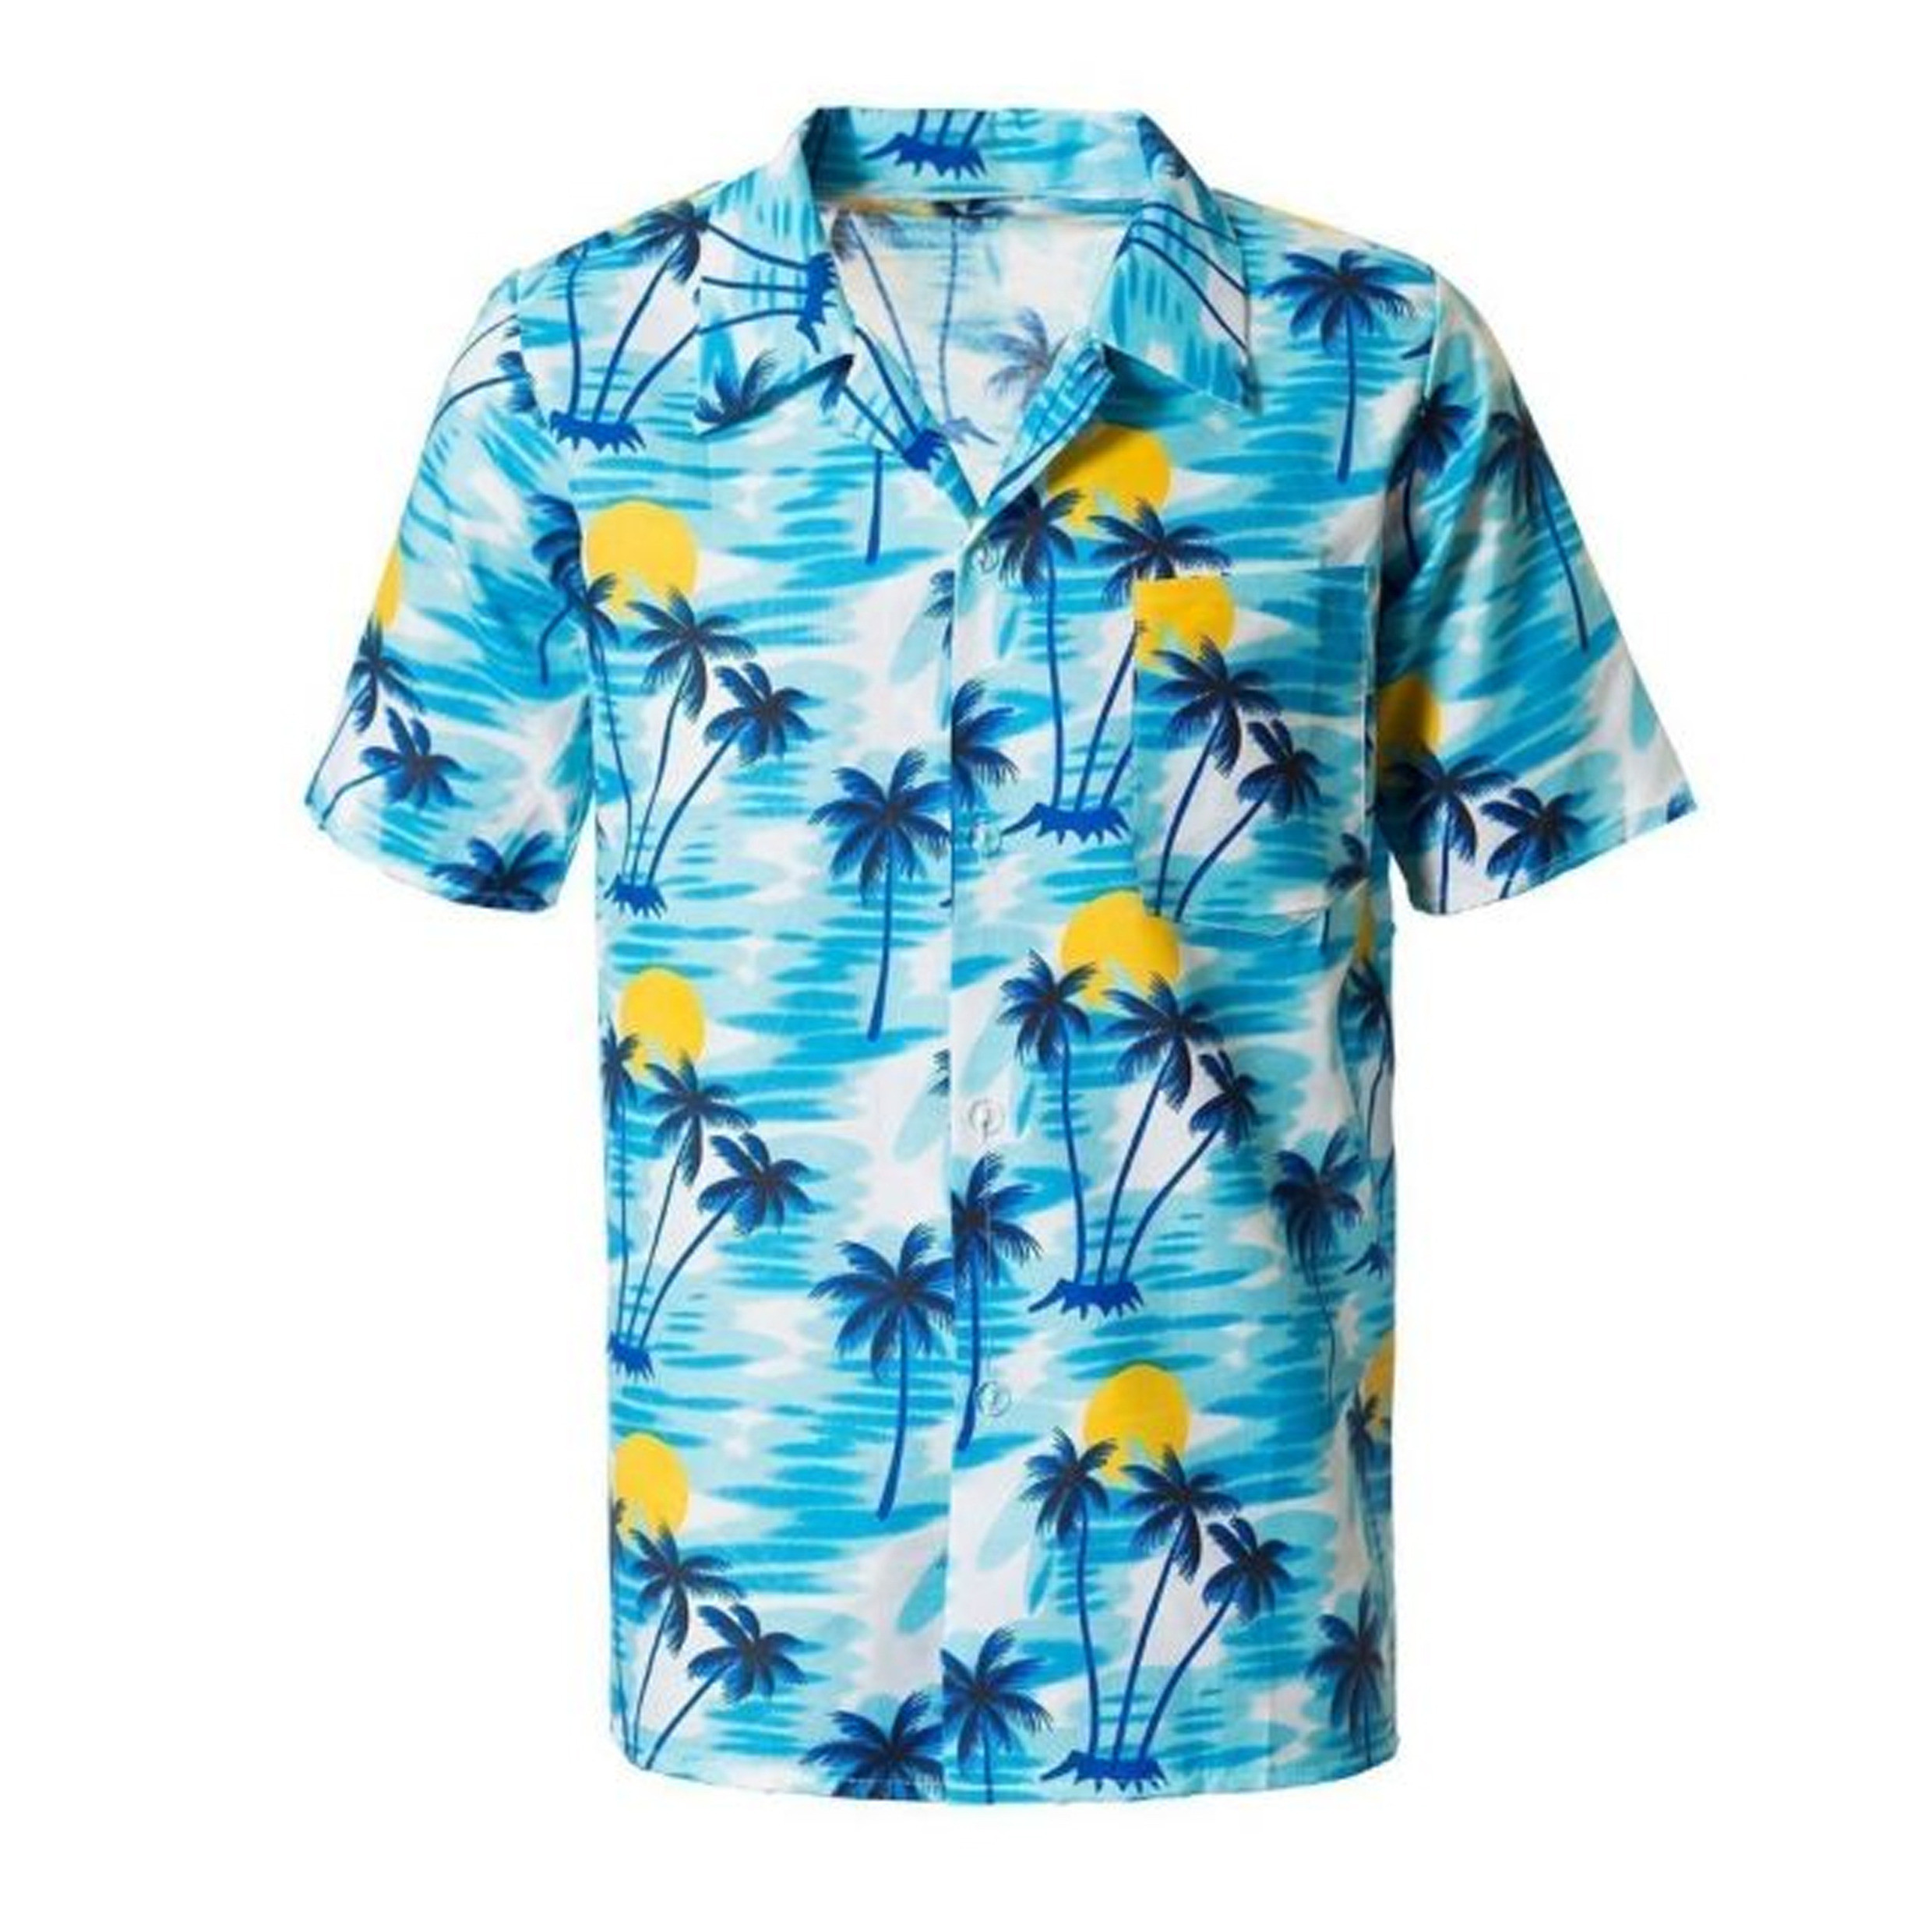 Toppers - Tropical party Hawaii blouse heren - palmbomen - blauw - carnaval/themafeest - Plus Size